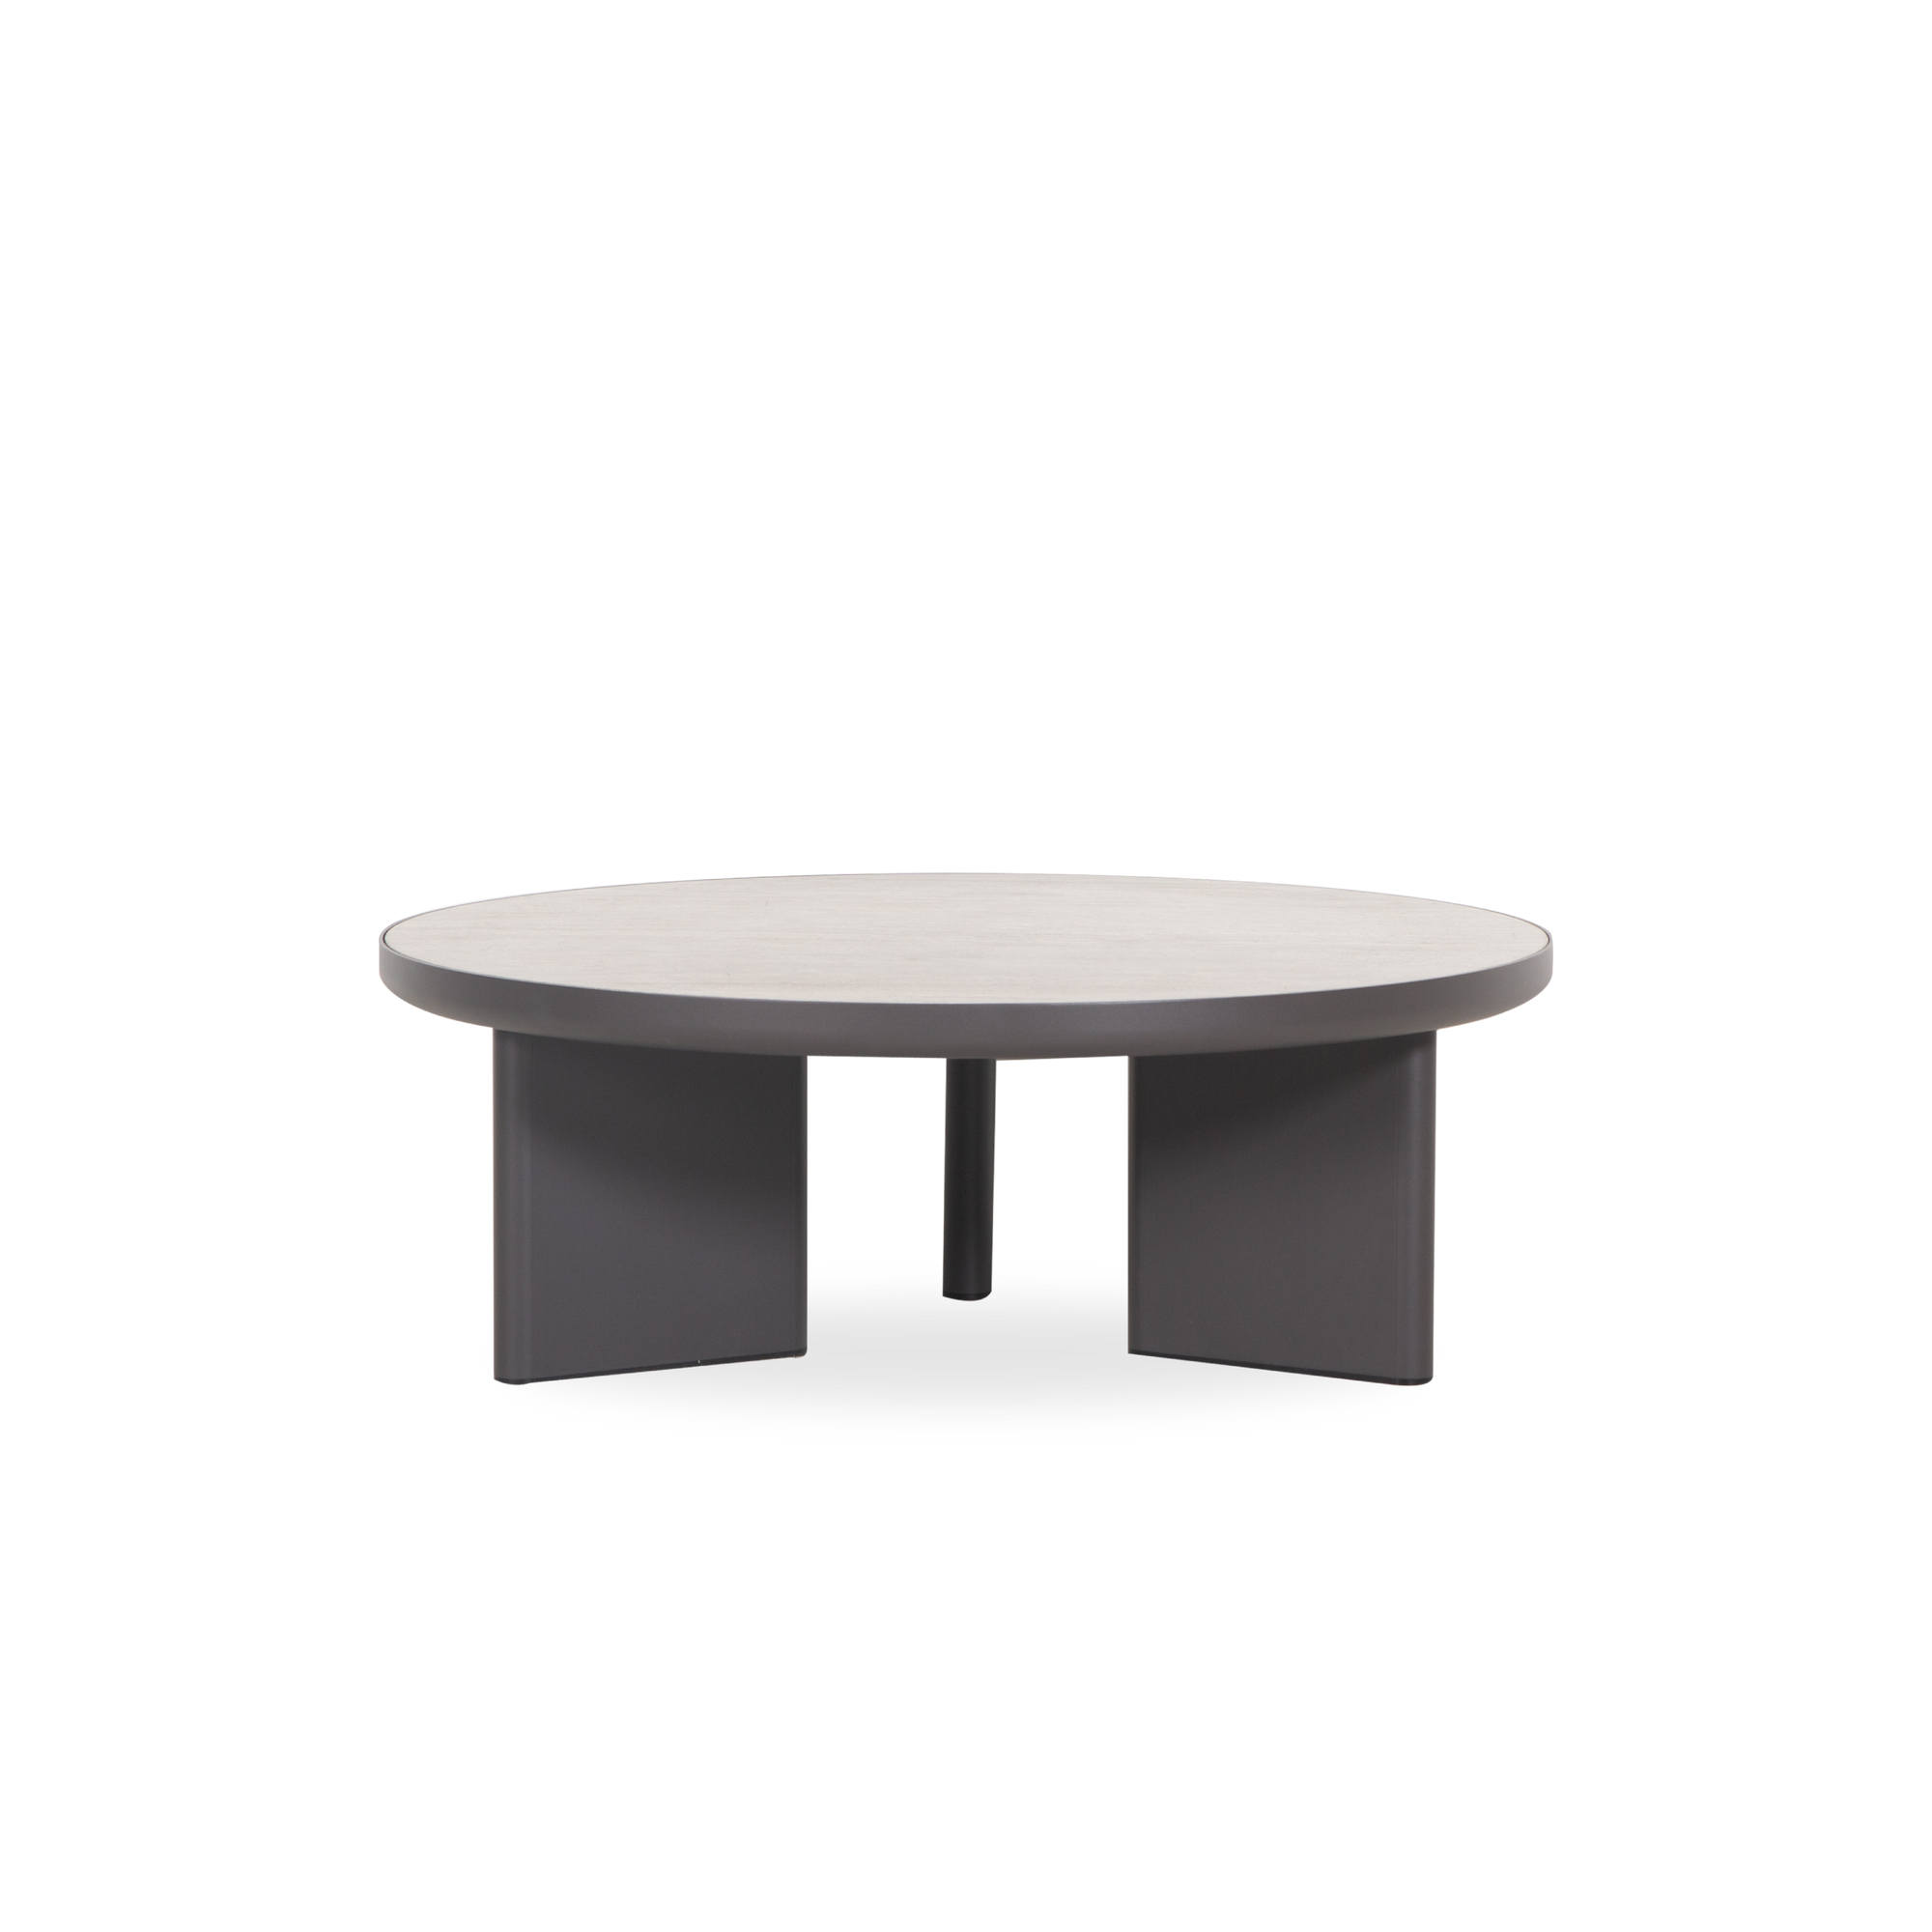 Bringing the indoors outside, the Moab Round Coffee Table displays the finest materials to create sophisticated outdoor dining.